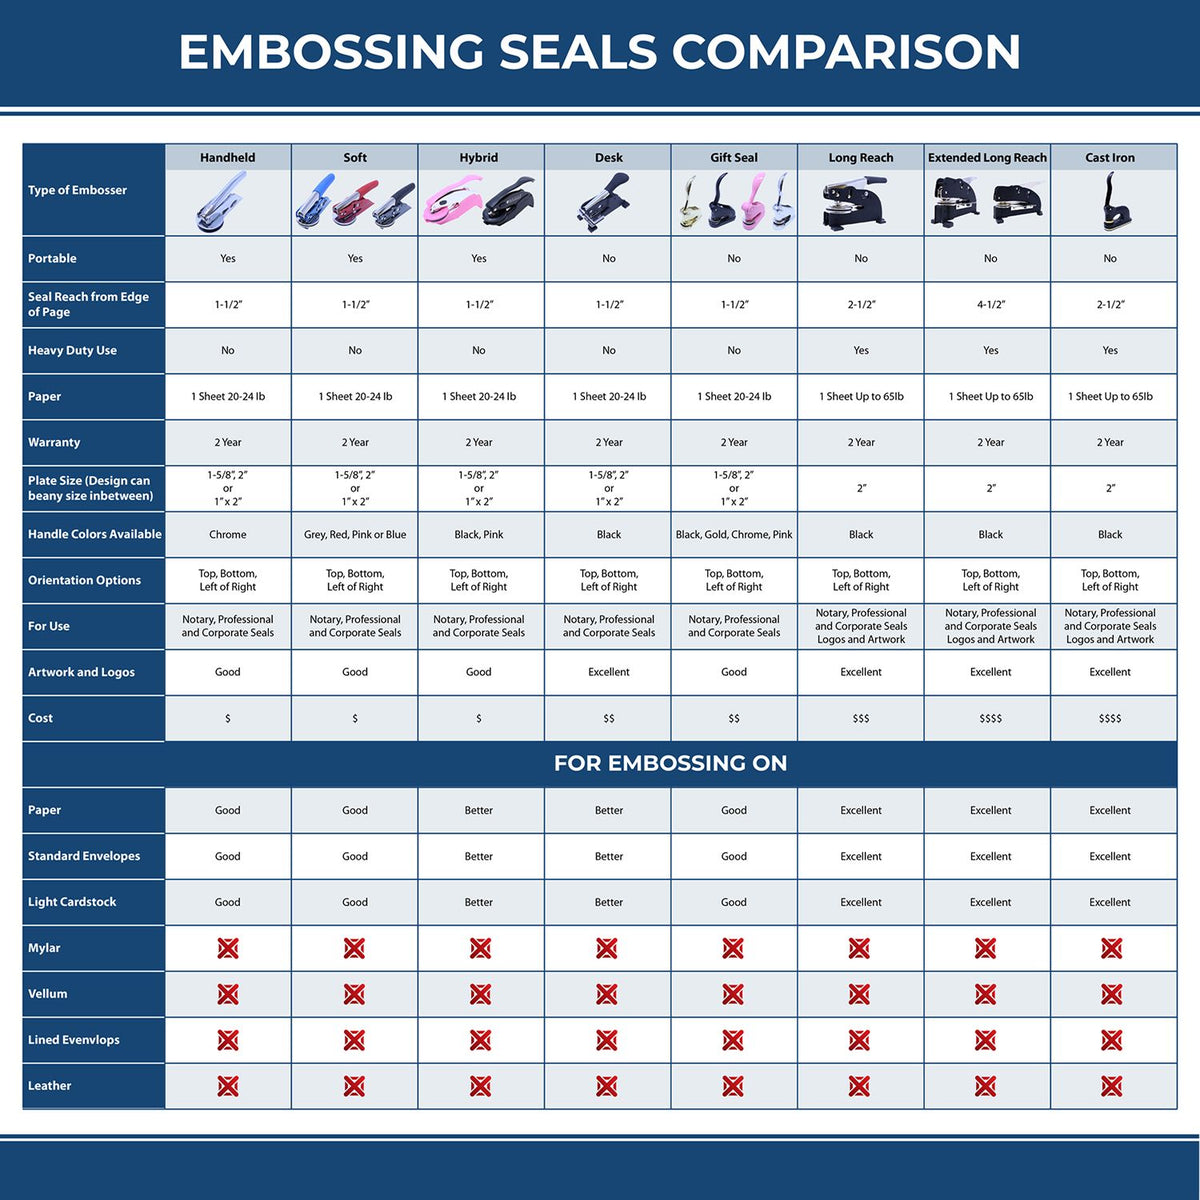 A comparison chart for the different types of mount models available for the State of Michigan Long Reach Architectural Embossing Seal.